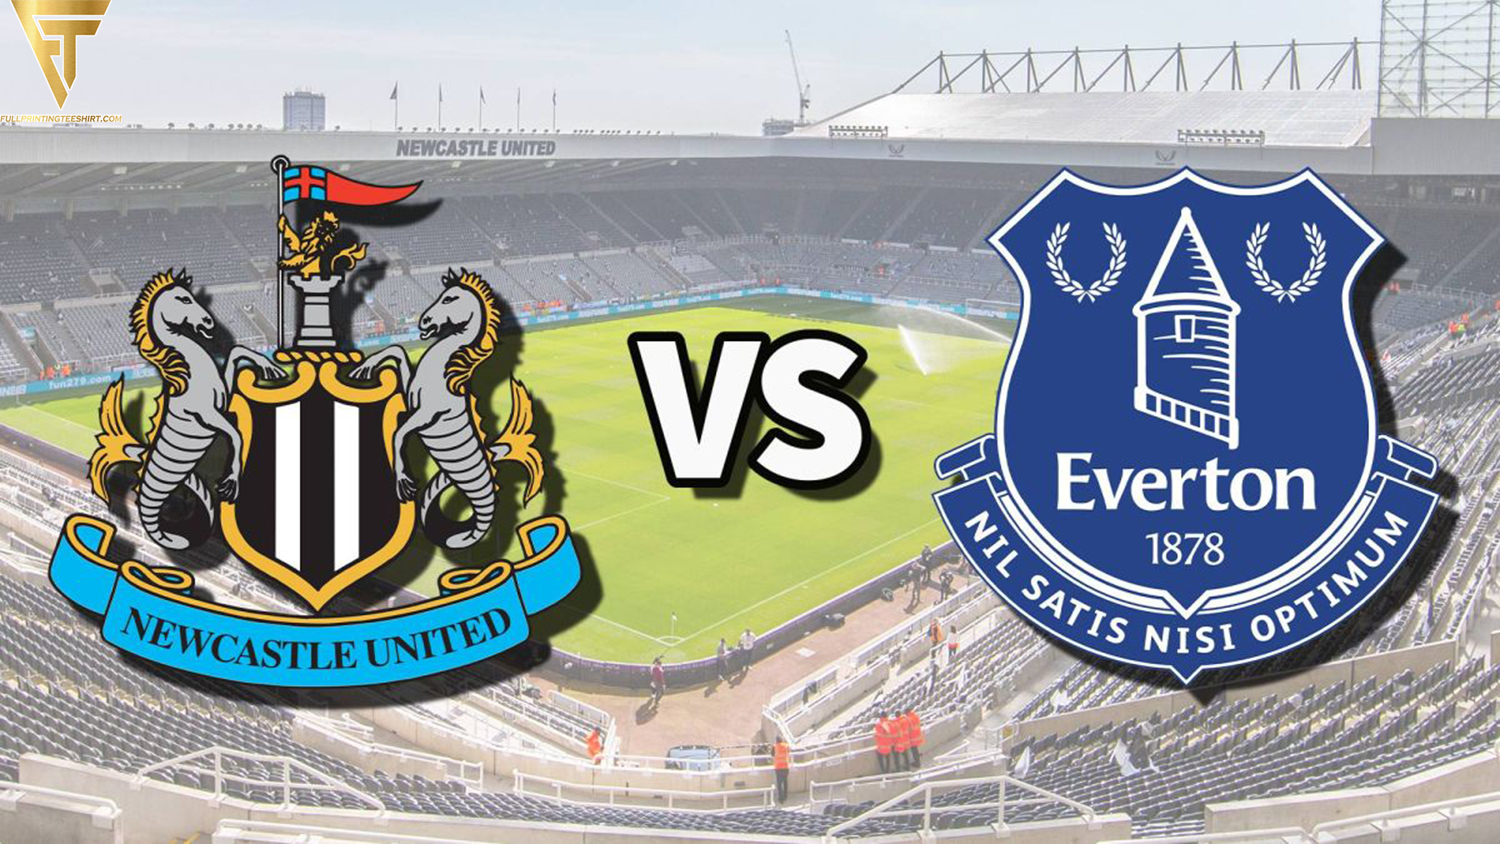 Can Everton Tame the Tyneside Tide High-Stakes Showdown Awaits at St. James' Park